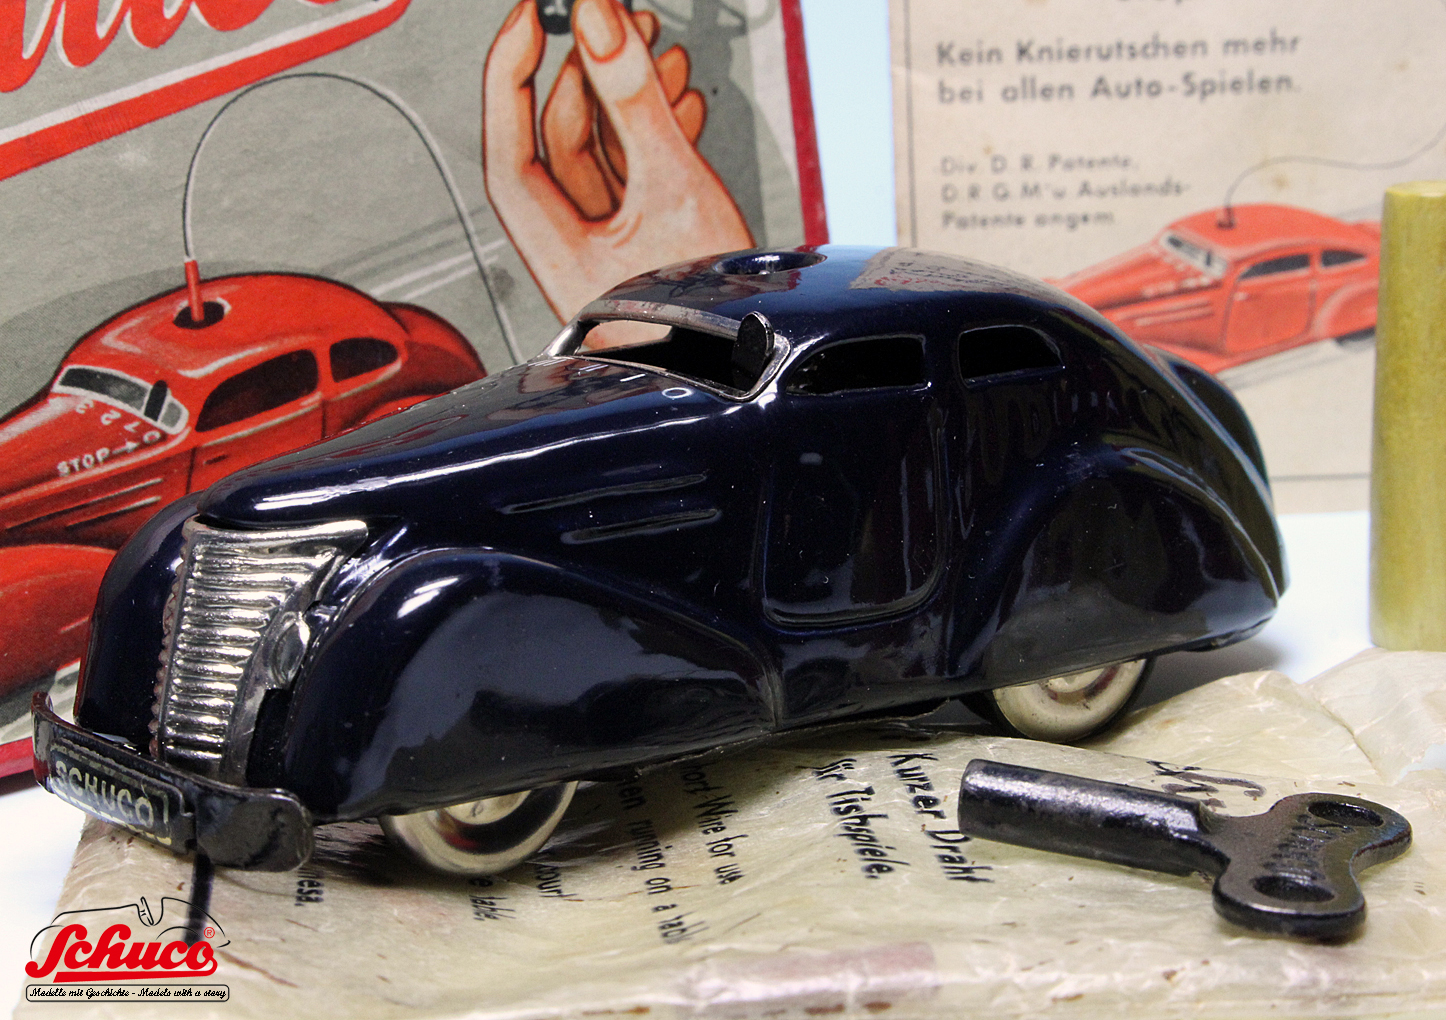 Fernlenk-Auto 3000, Models with a story, Classic Tin Toys, Schuco